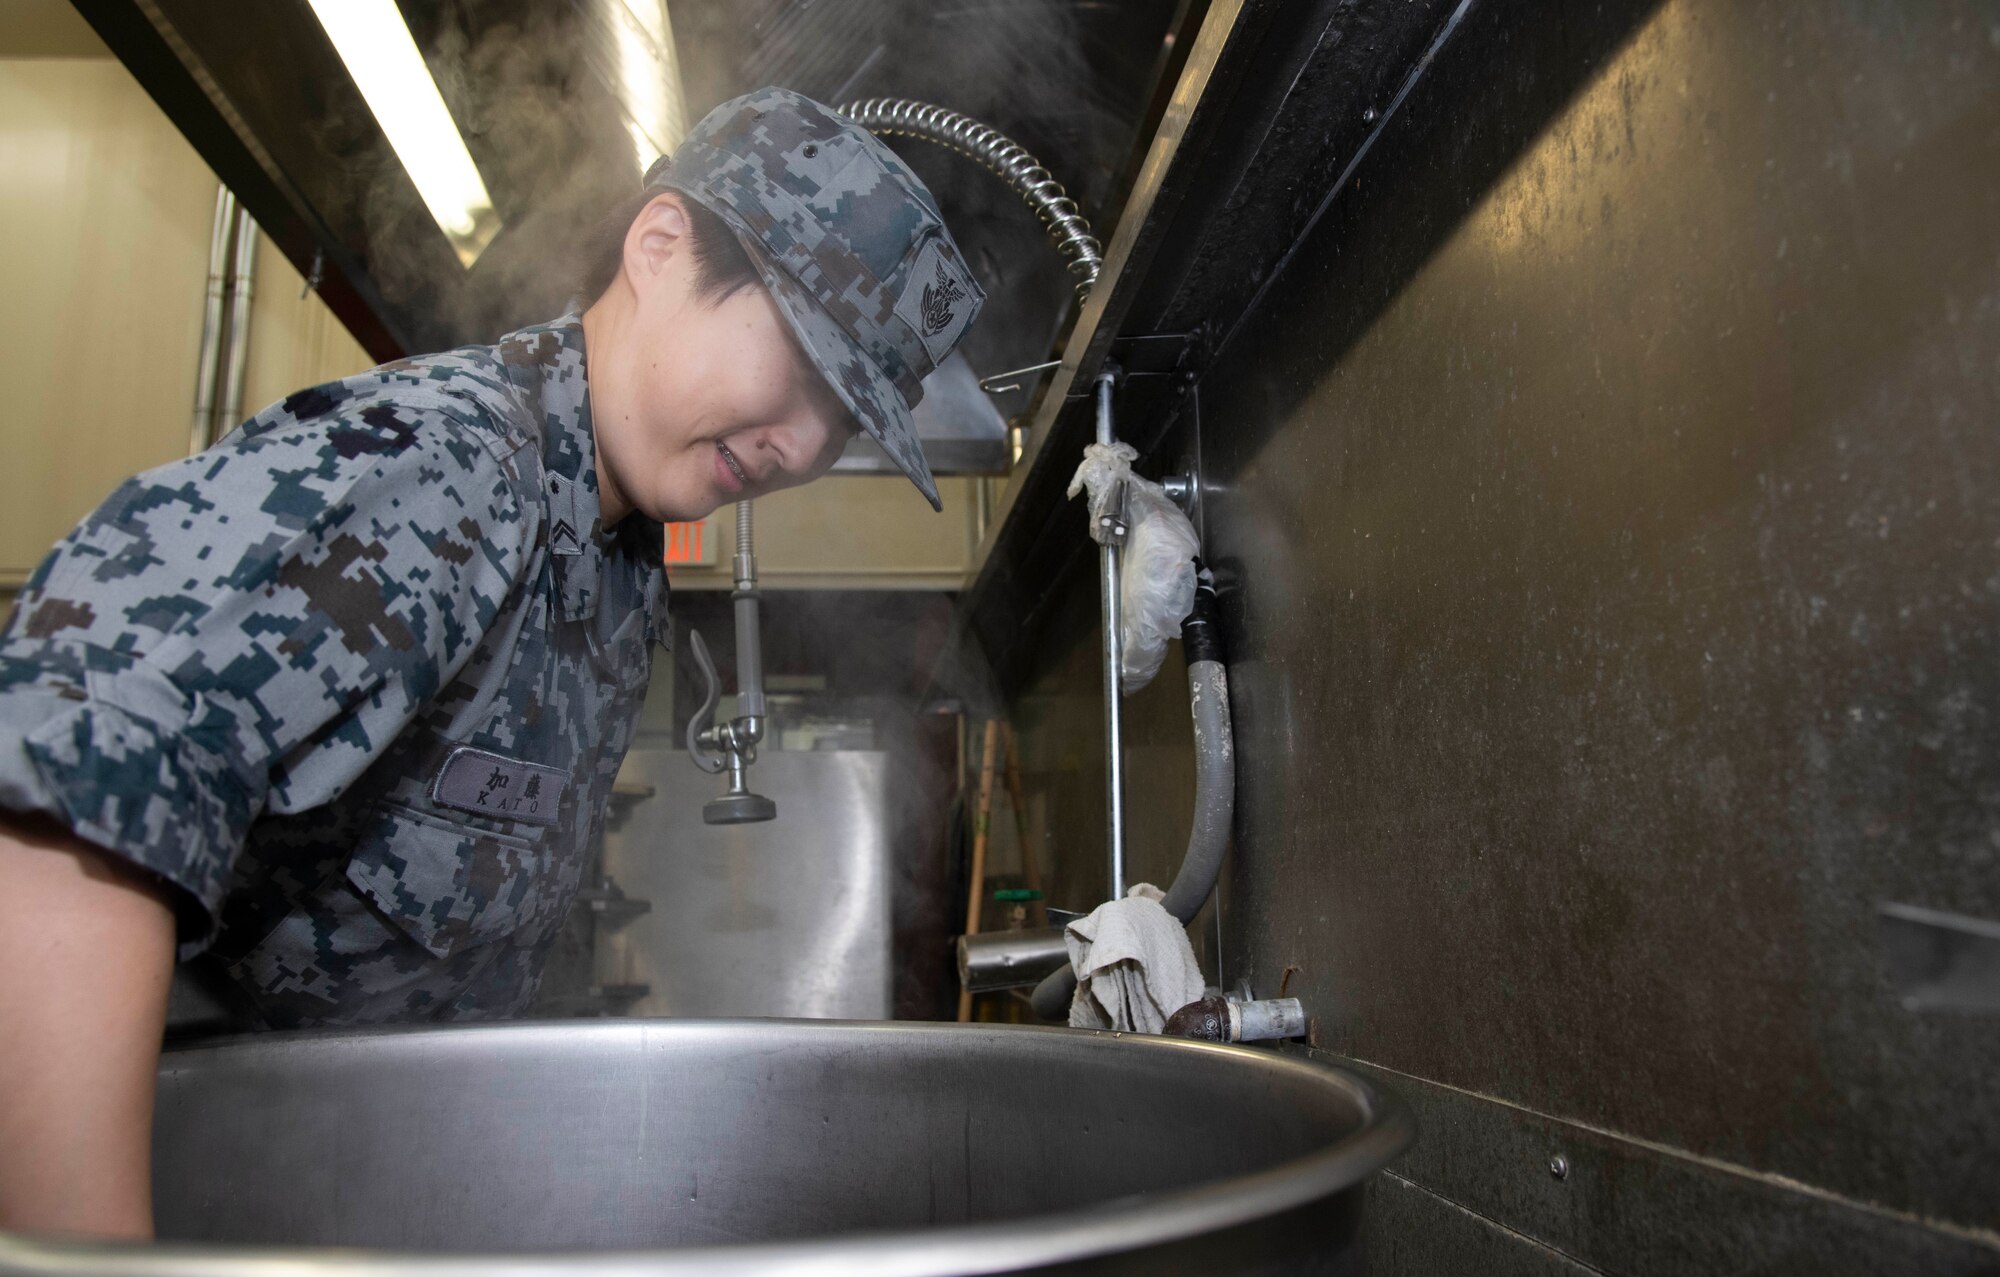 Japan Air Self-Defense Force Tech. Sgt. Tomoyo Kato, a 27th Aircraft Control and Warning Squadron nutritionist, stirs food in a large kettle during a Bilateral Exchange Program visit at Misawa Air Base, Japan, Sept. 21, 2018. The exchange group split into pairs to learn the similarities and differences between each other’s occupations. (U.S. Air Force photo by Senior Airman Sadie Colbert)